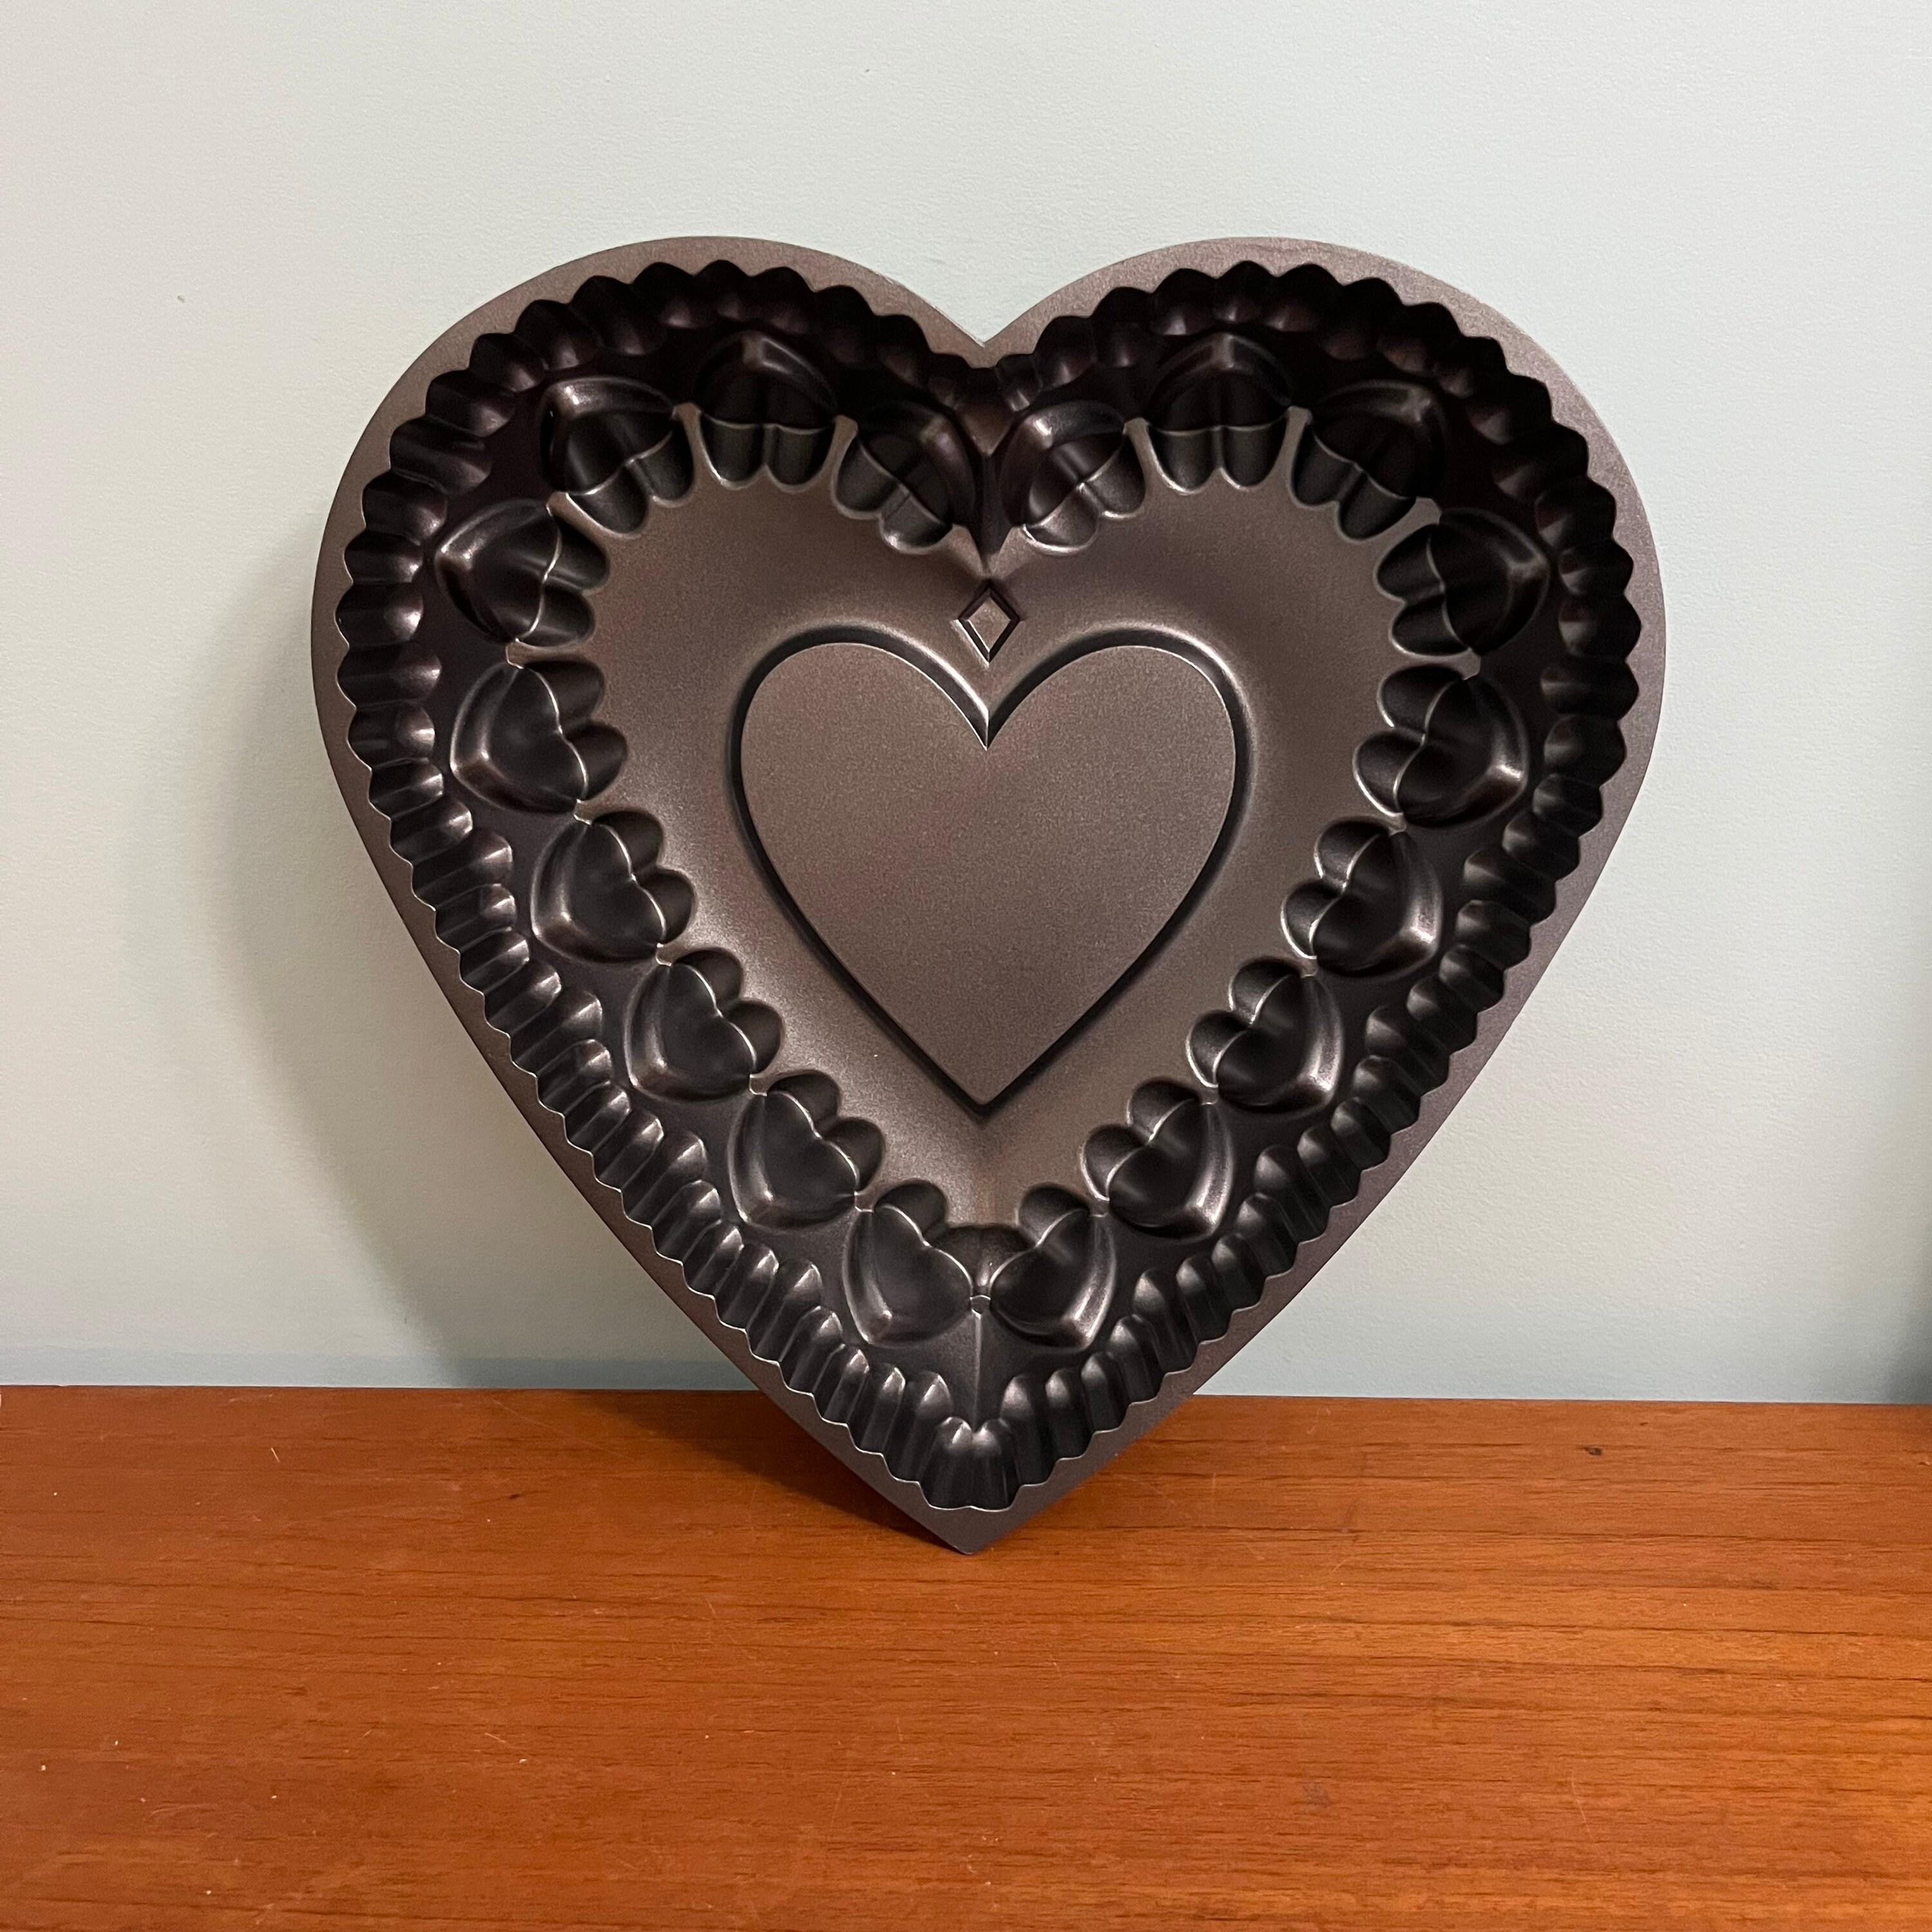 Non-Stick Fluted Cake Pan-Heart